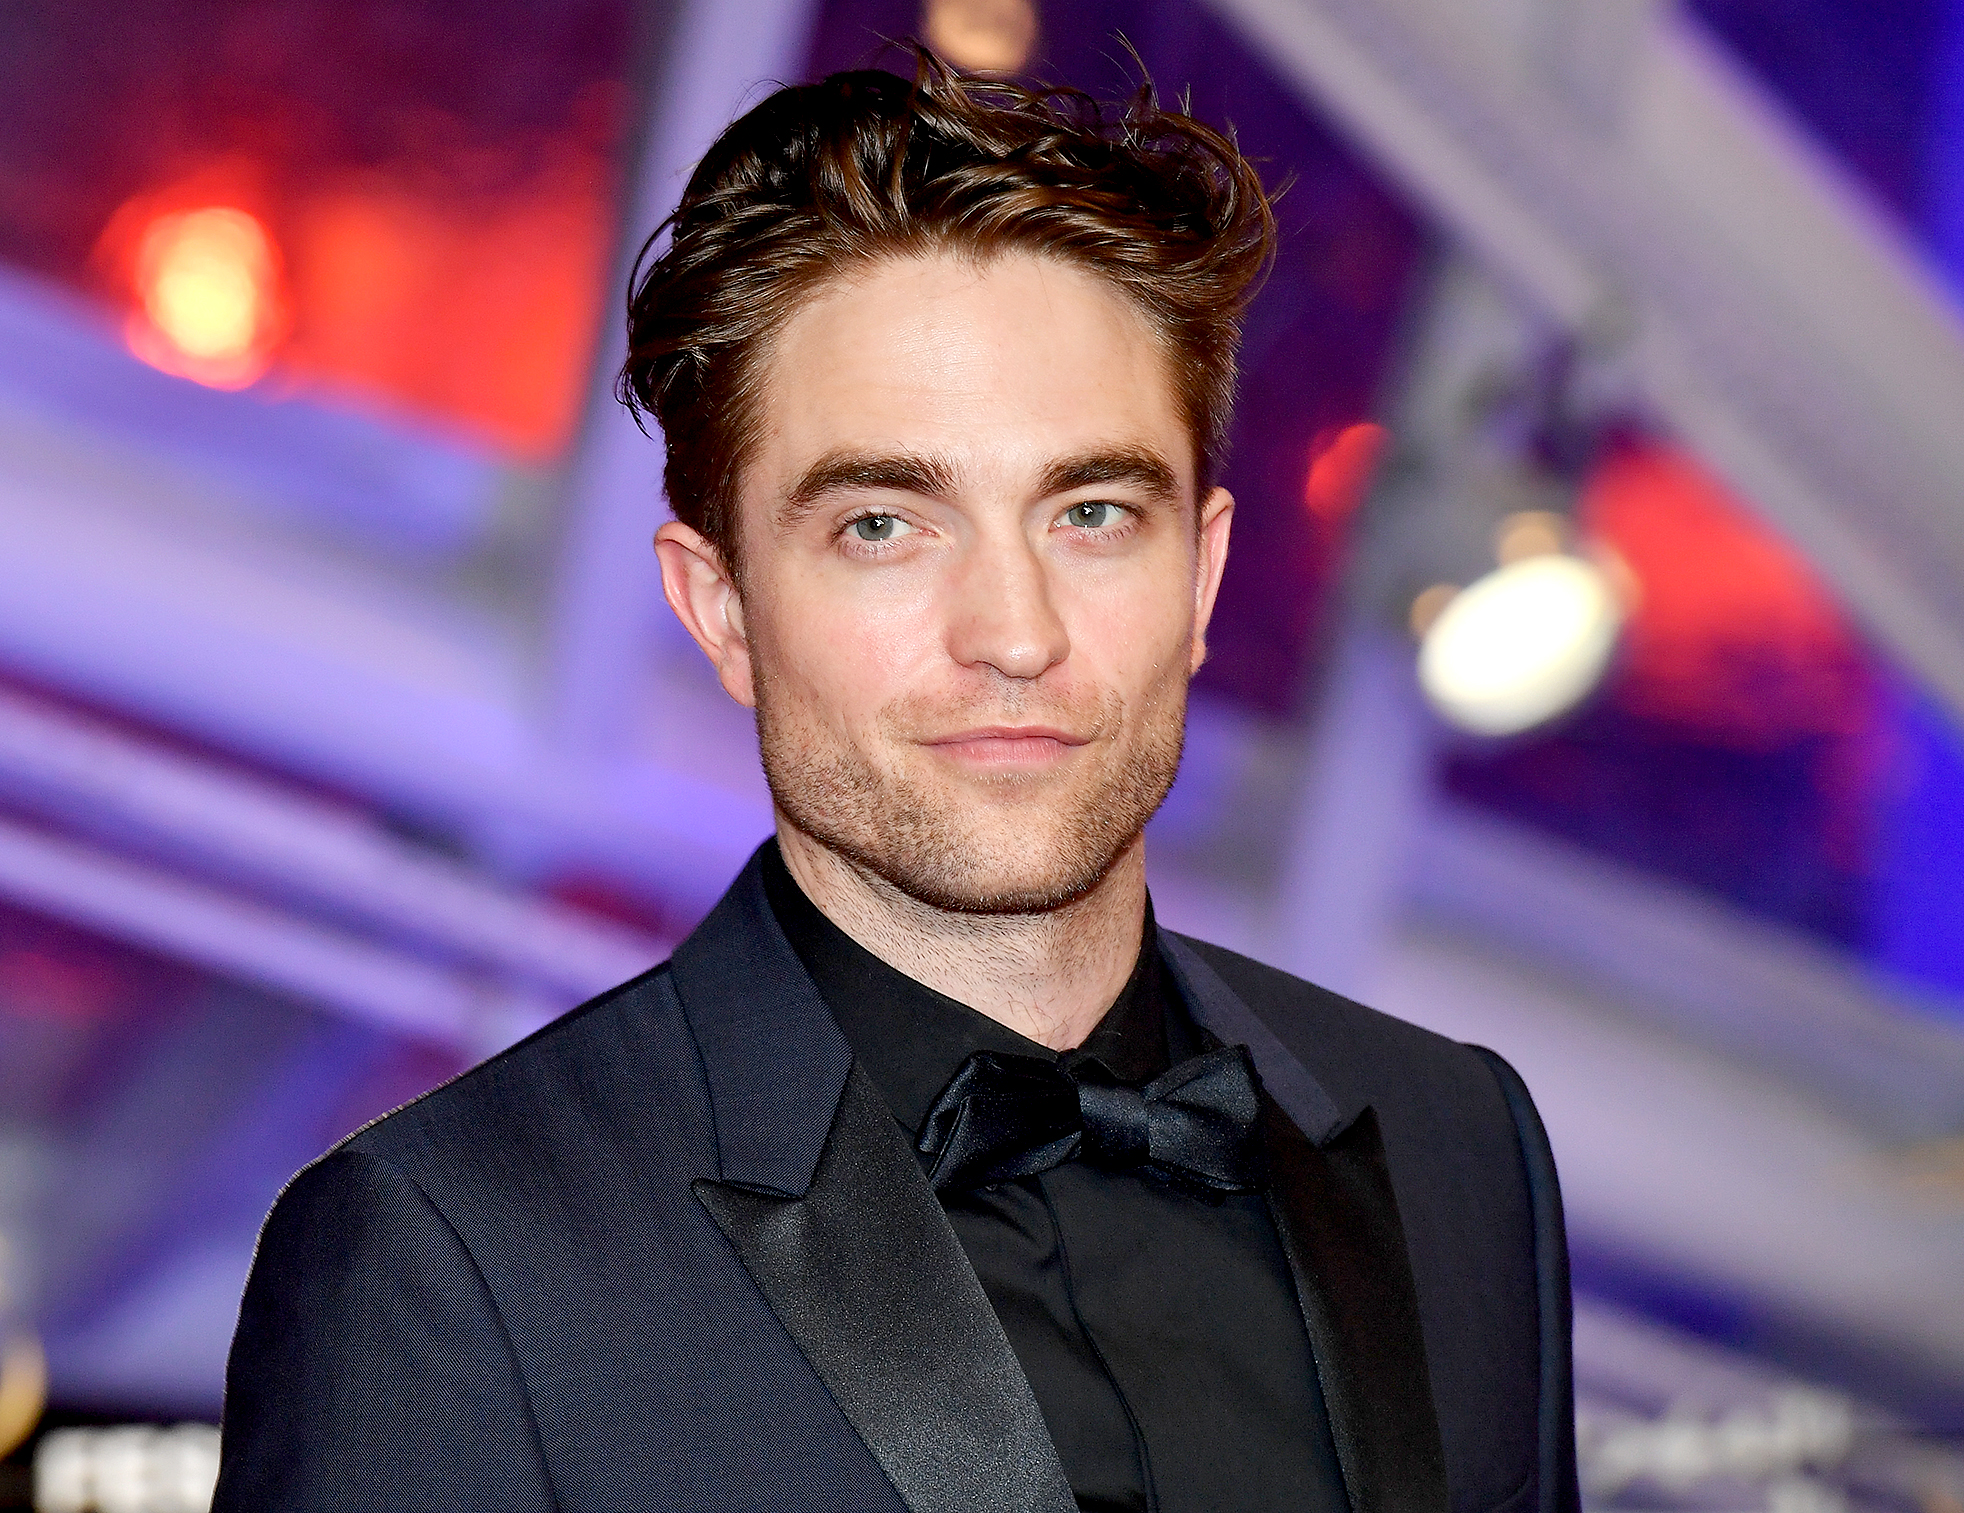 Robert Pattinson Rewatched ‘Twilight’ and Has New Thoughts